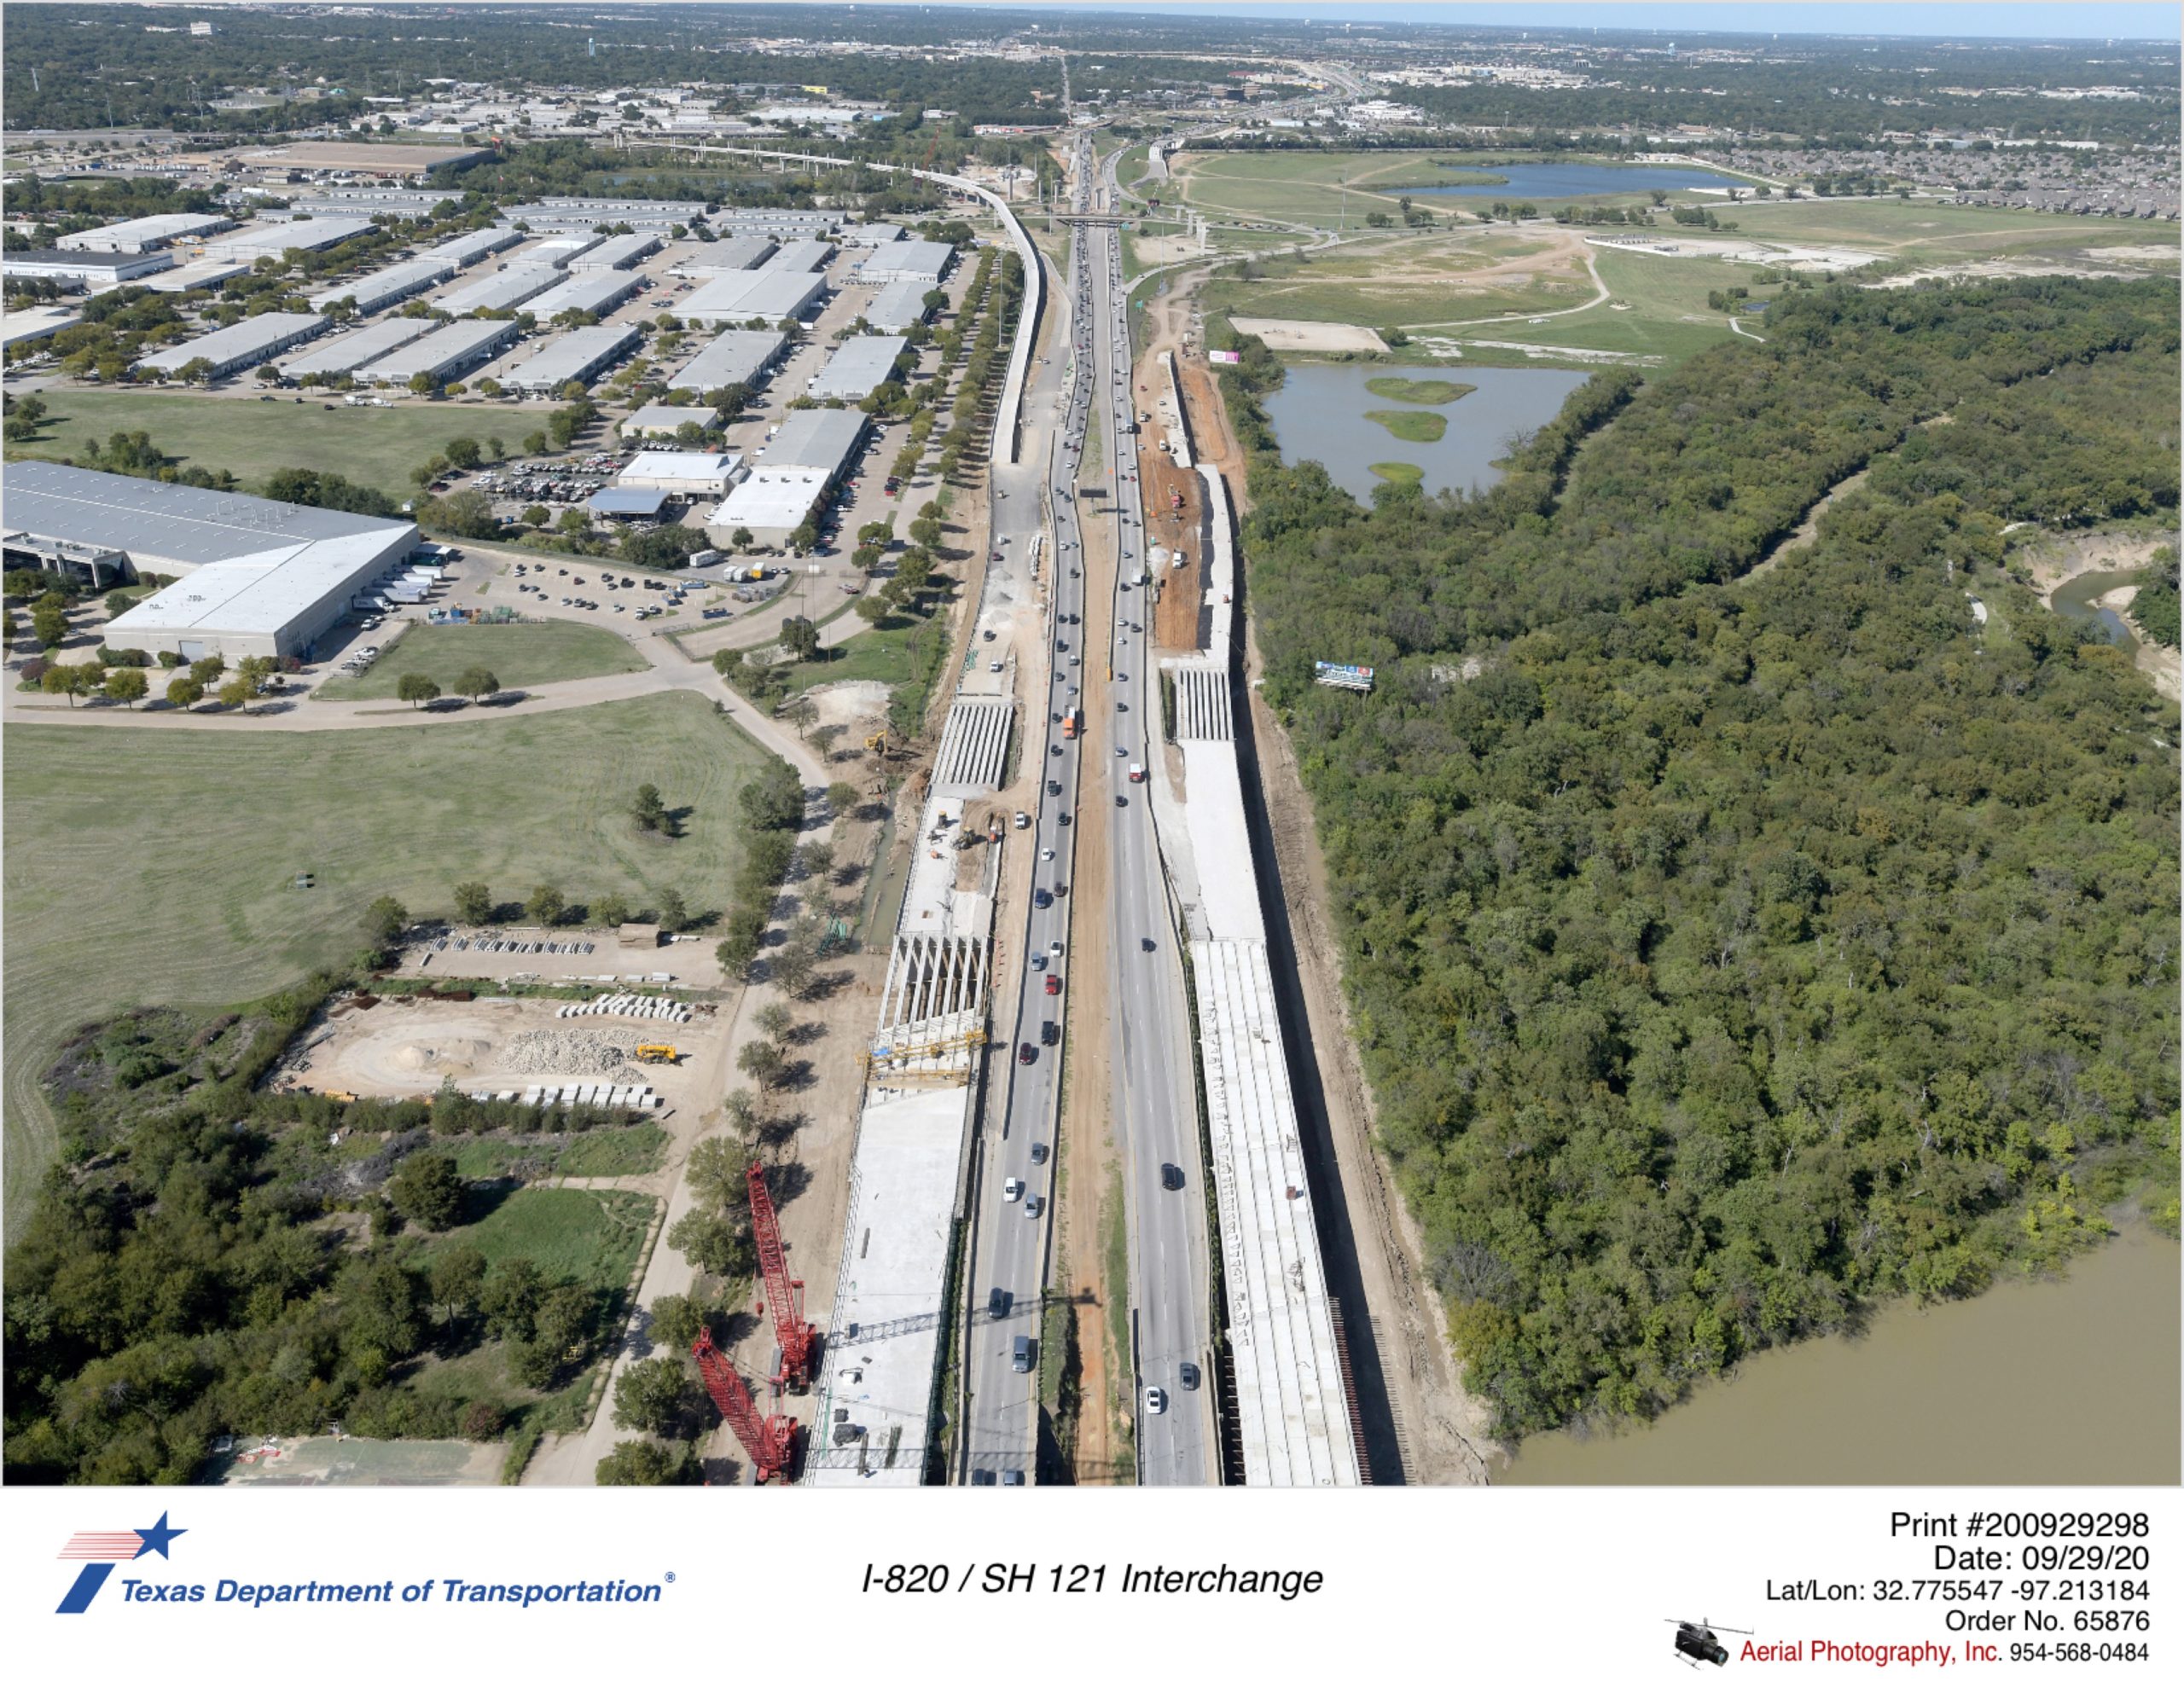 I-820 looking north over Trinity River. Bridge structures for new north and southbound I-820 shown constructed on outside of existing lanes.